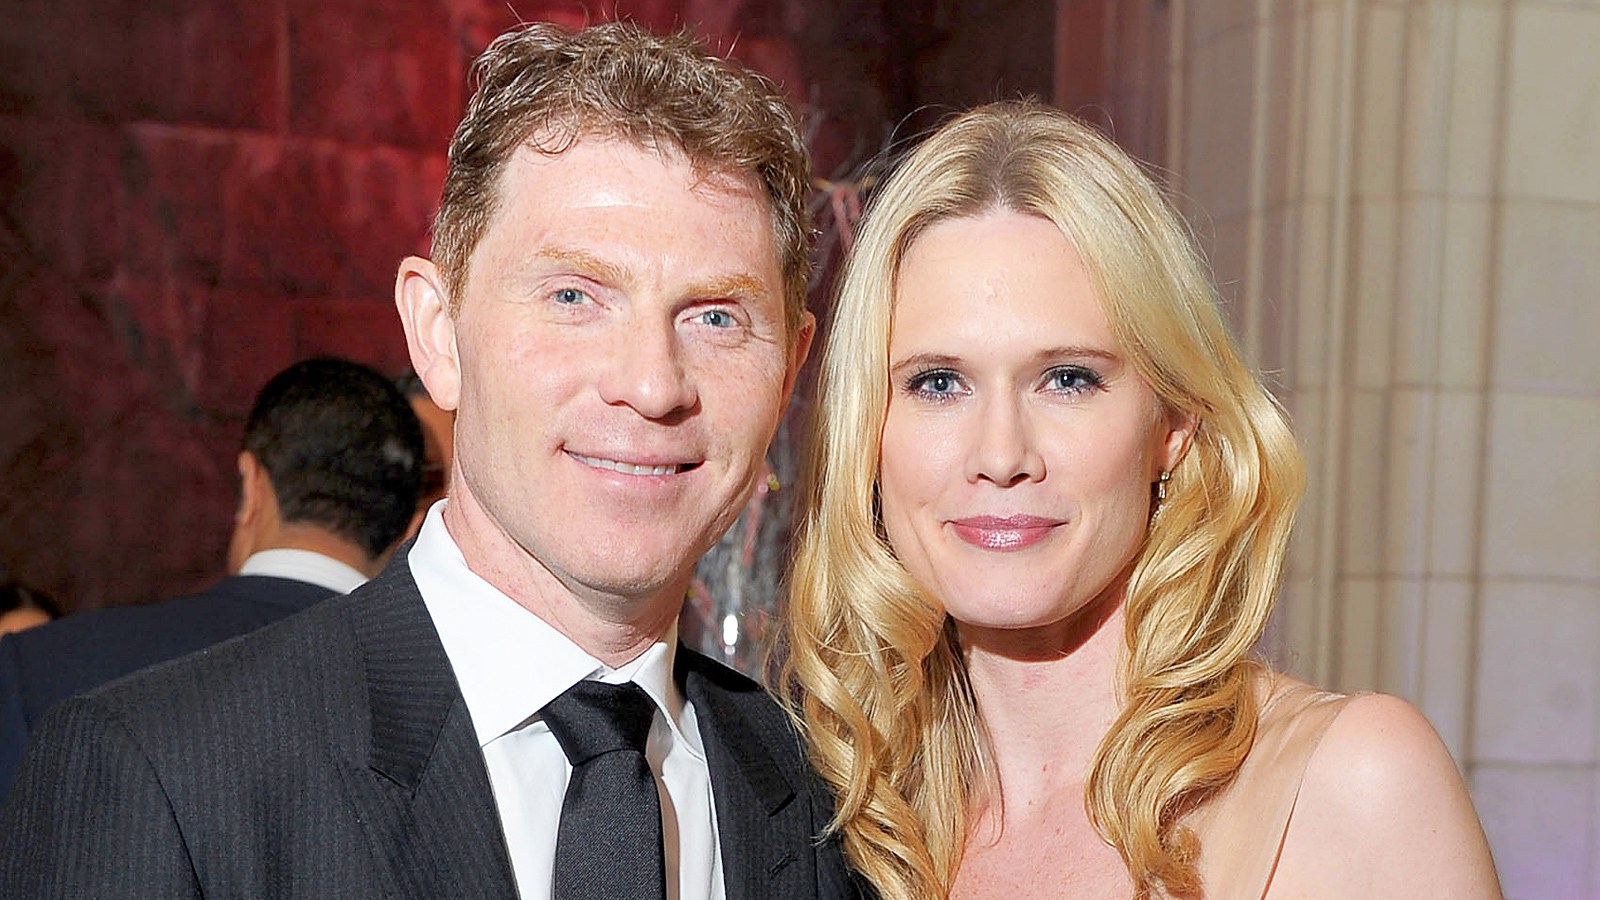 While Law And Order actress, Stephanie March, was shocked to discover her h...